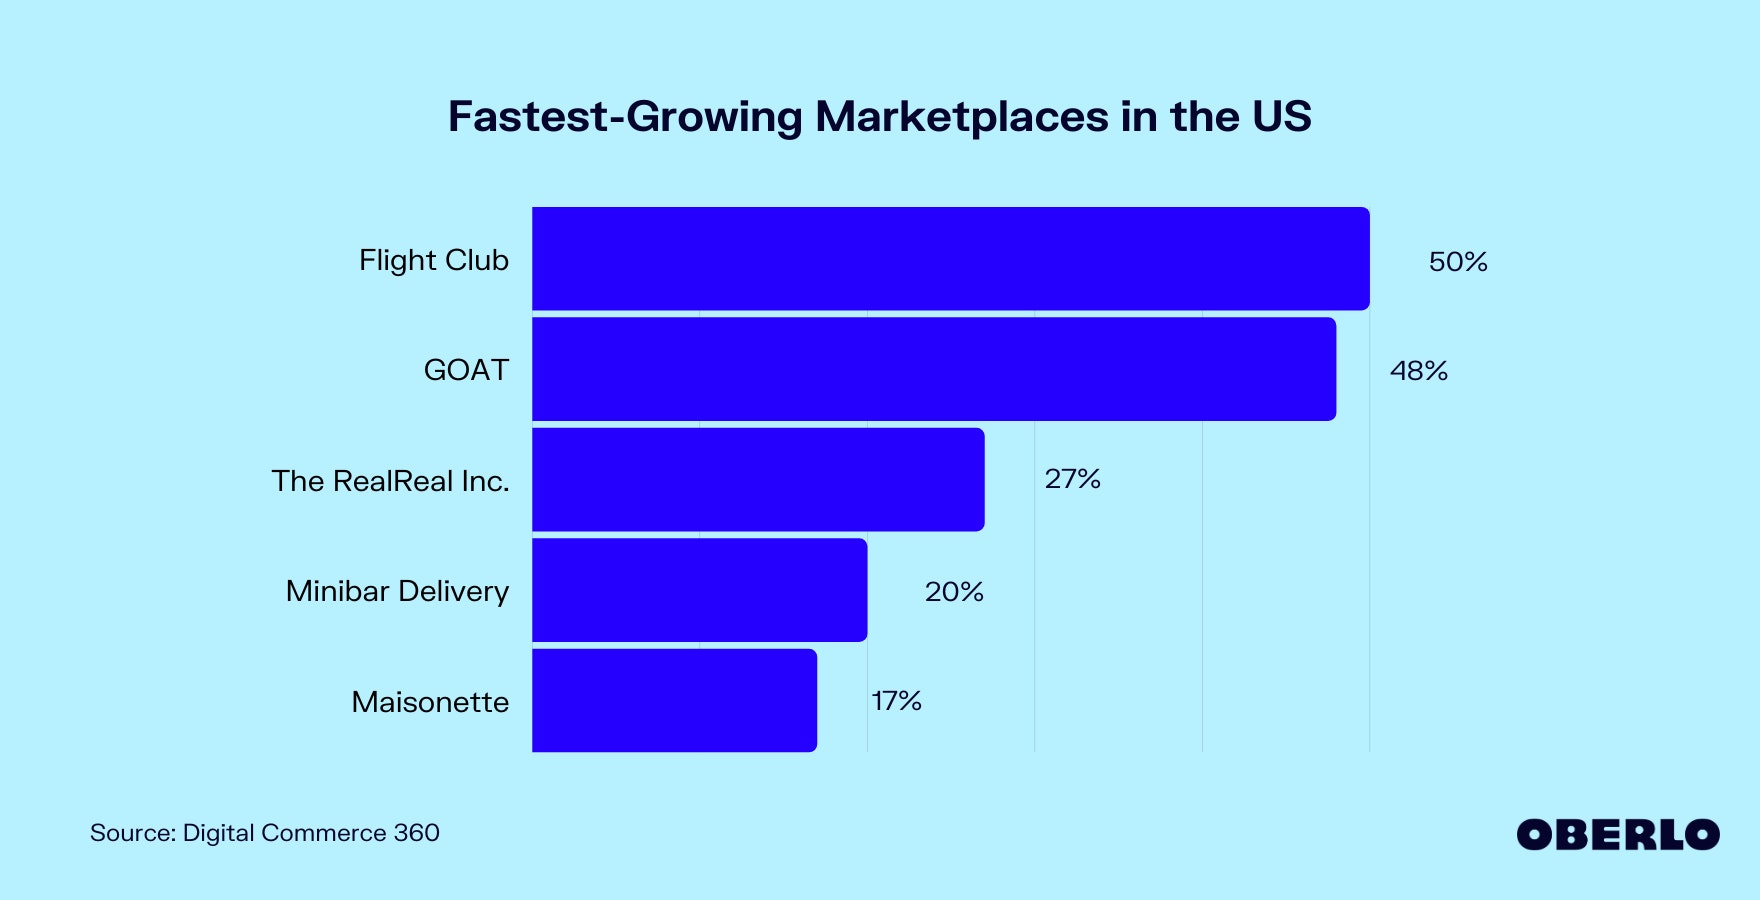 Chart showing the Fastest-Growing Marketplaces in the US